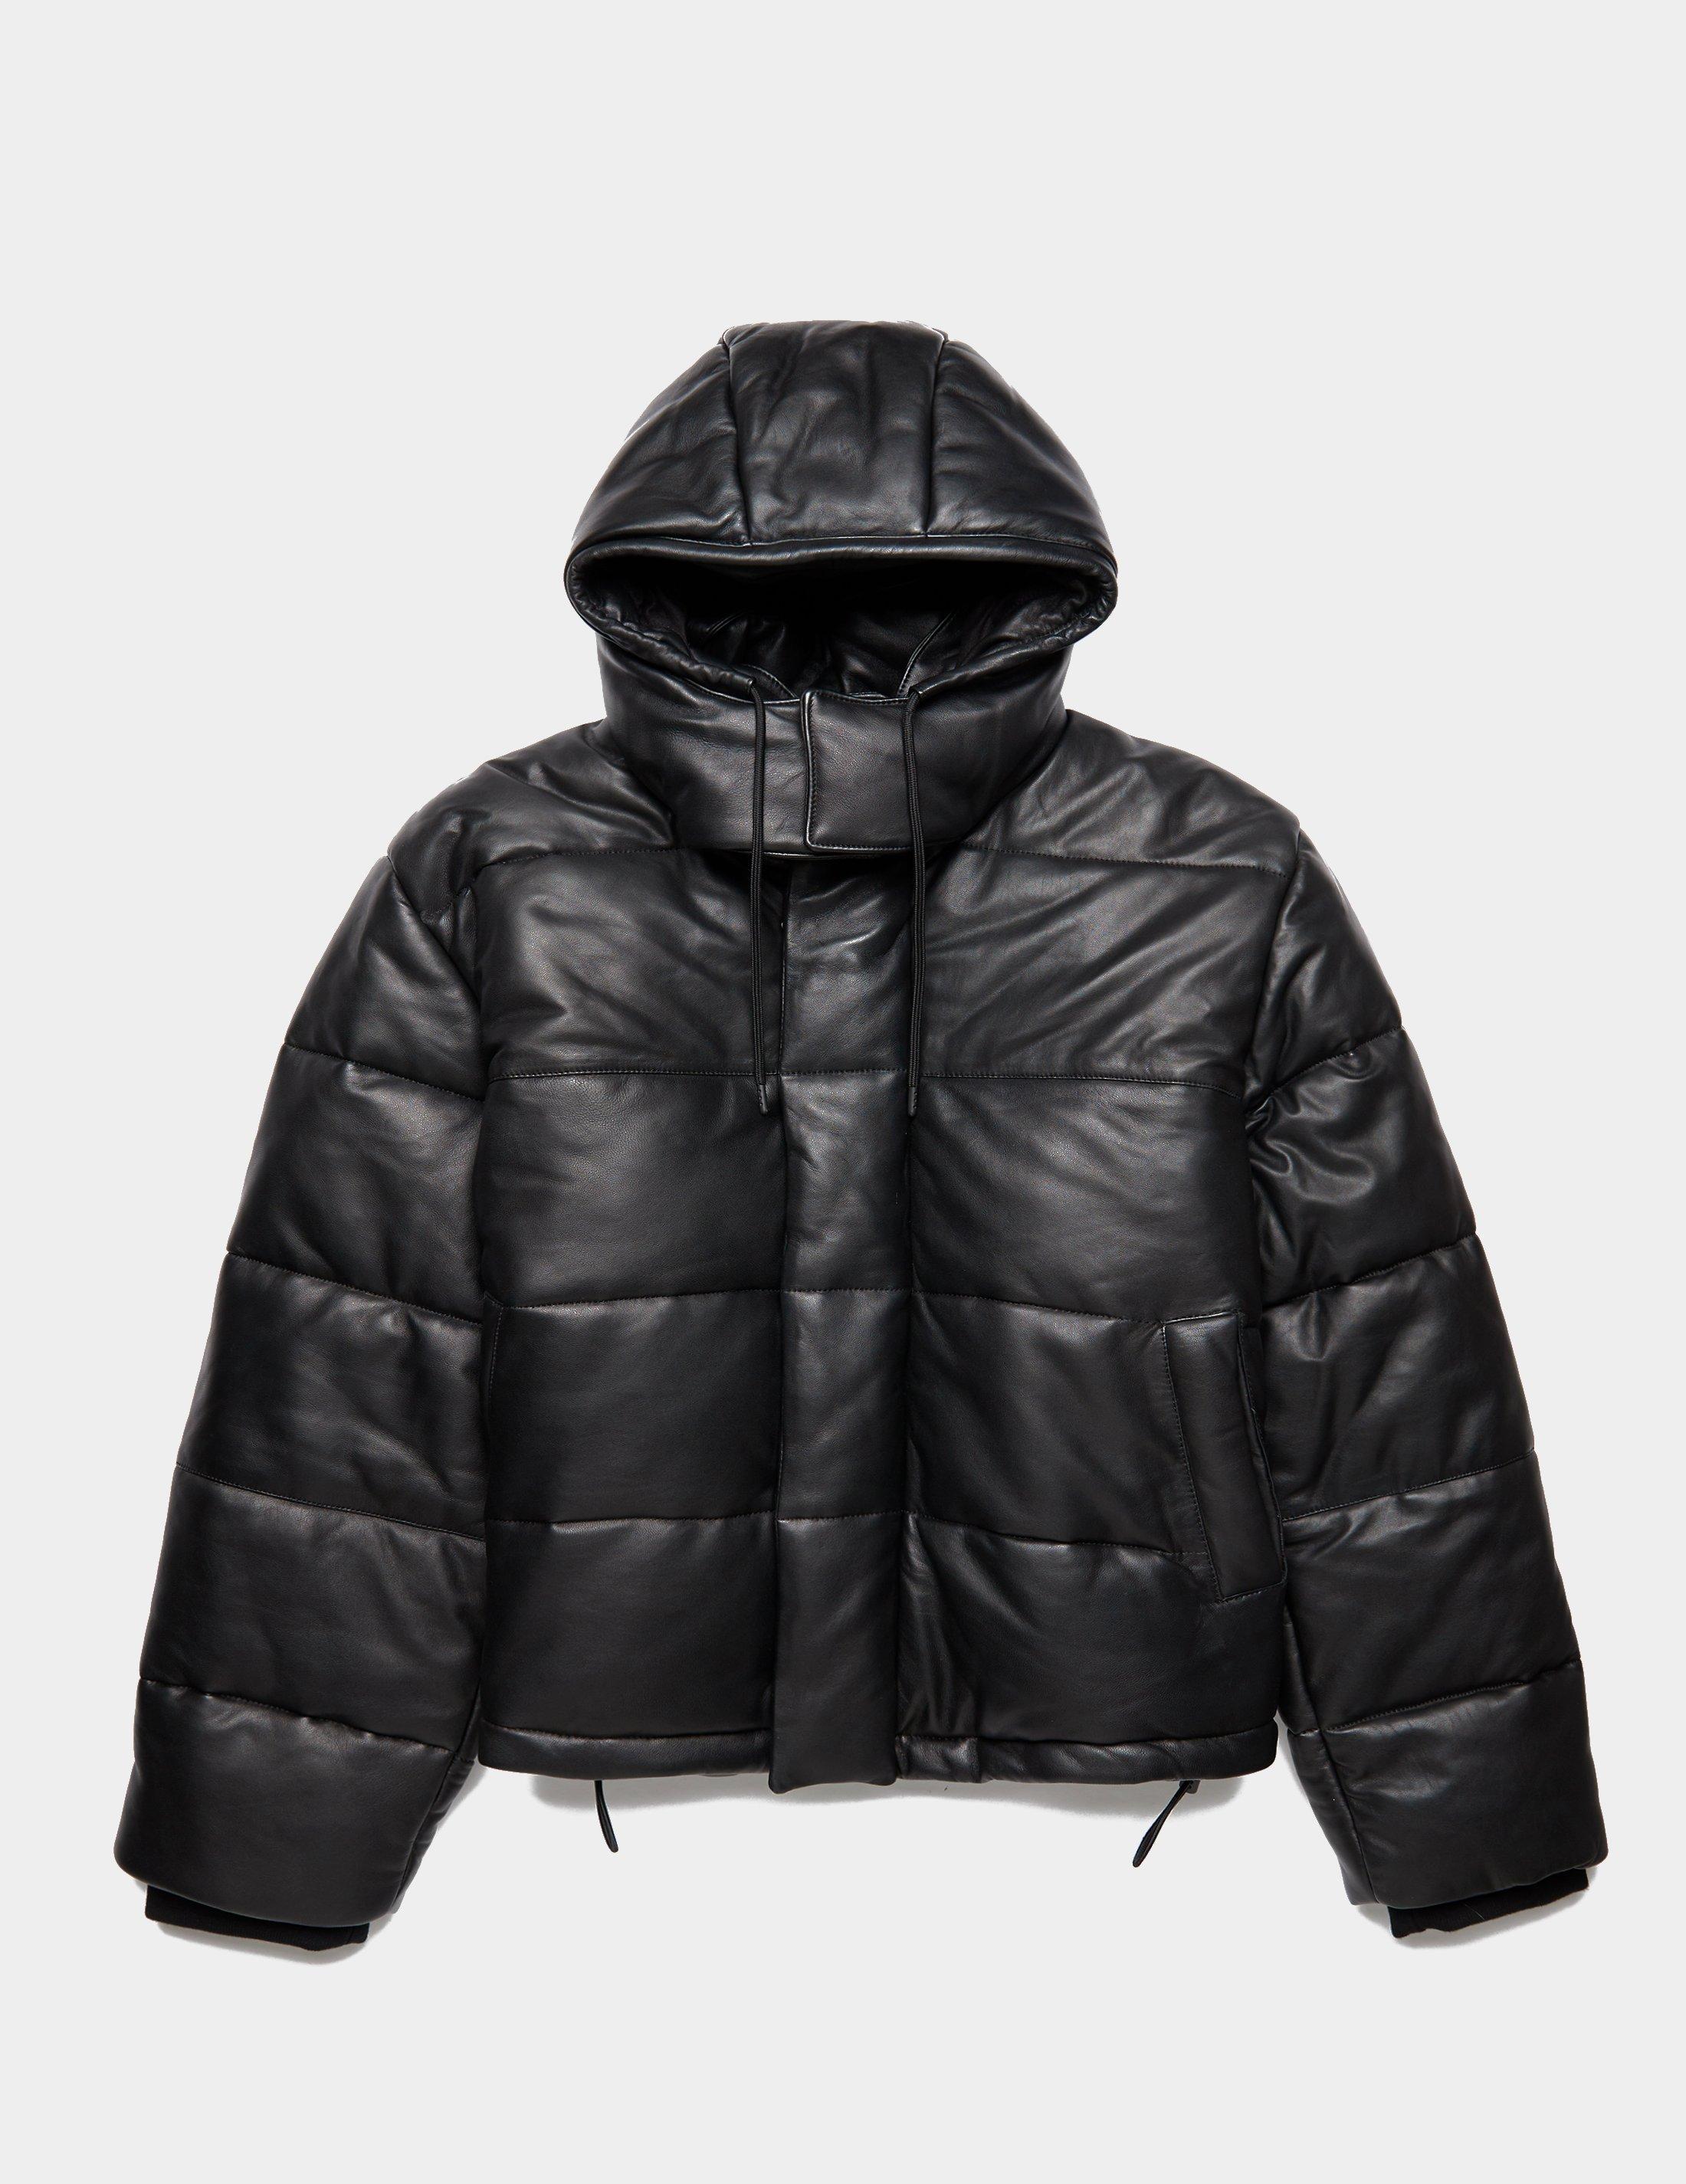 McQ Leather Puffer Jacket Black for Men - Lyst